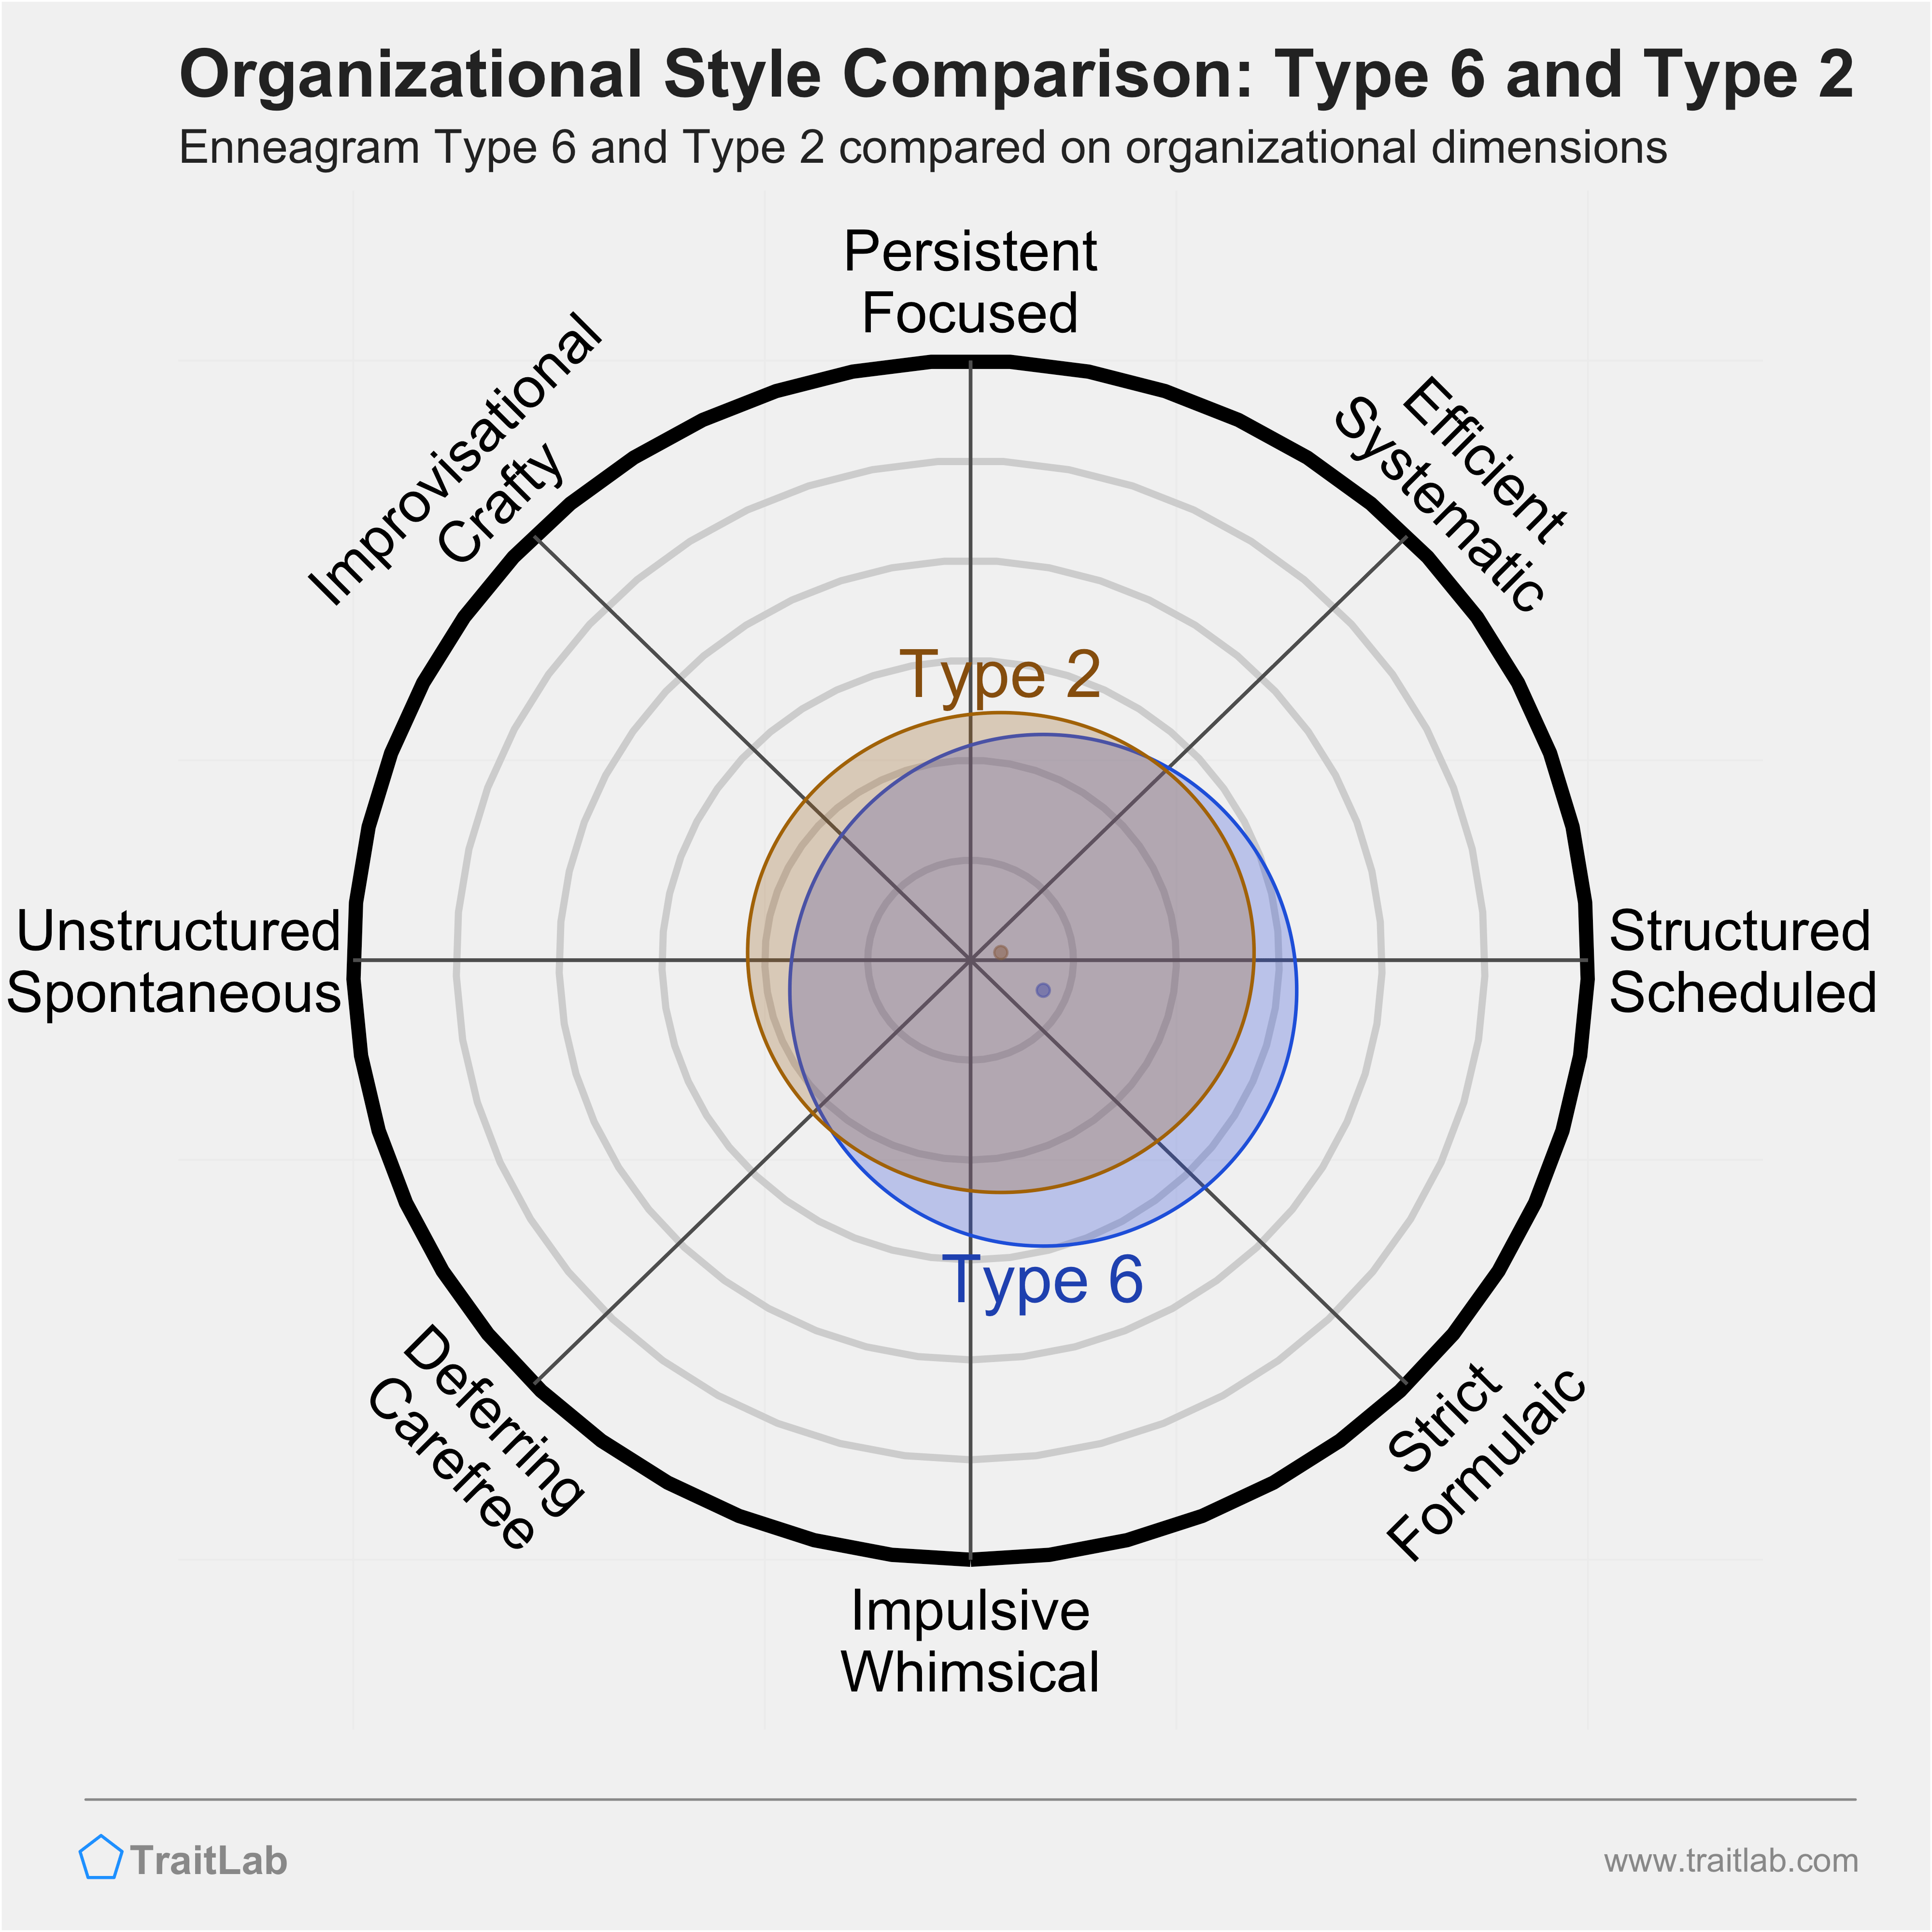 Type 6 and Type 2 comparison across organizational dimensions